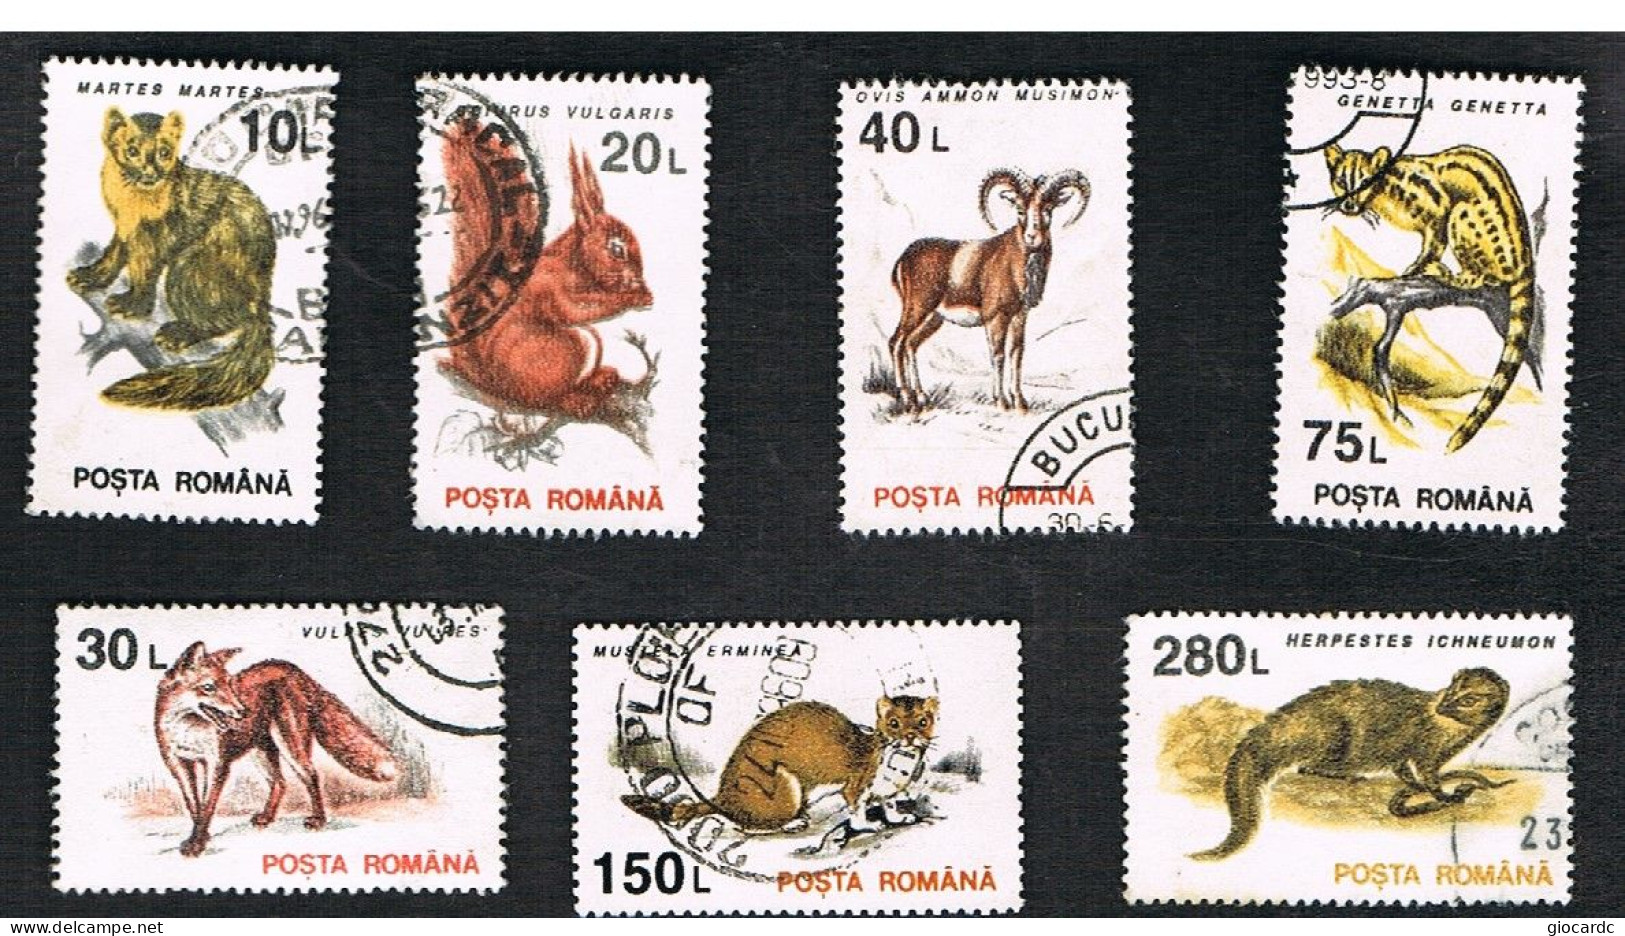 ROMANIA - SG 5533.5542  - 1995  CURRENT SERIE: ANIMALS   (7 STAMPS OF THE SET  ON WHITE PAPER)  - USED ° - Used Stamps